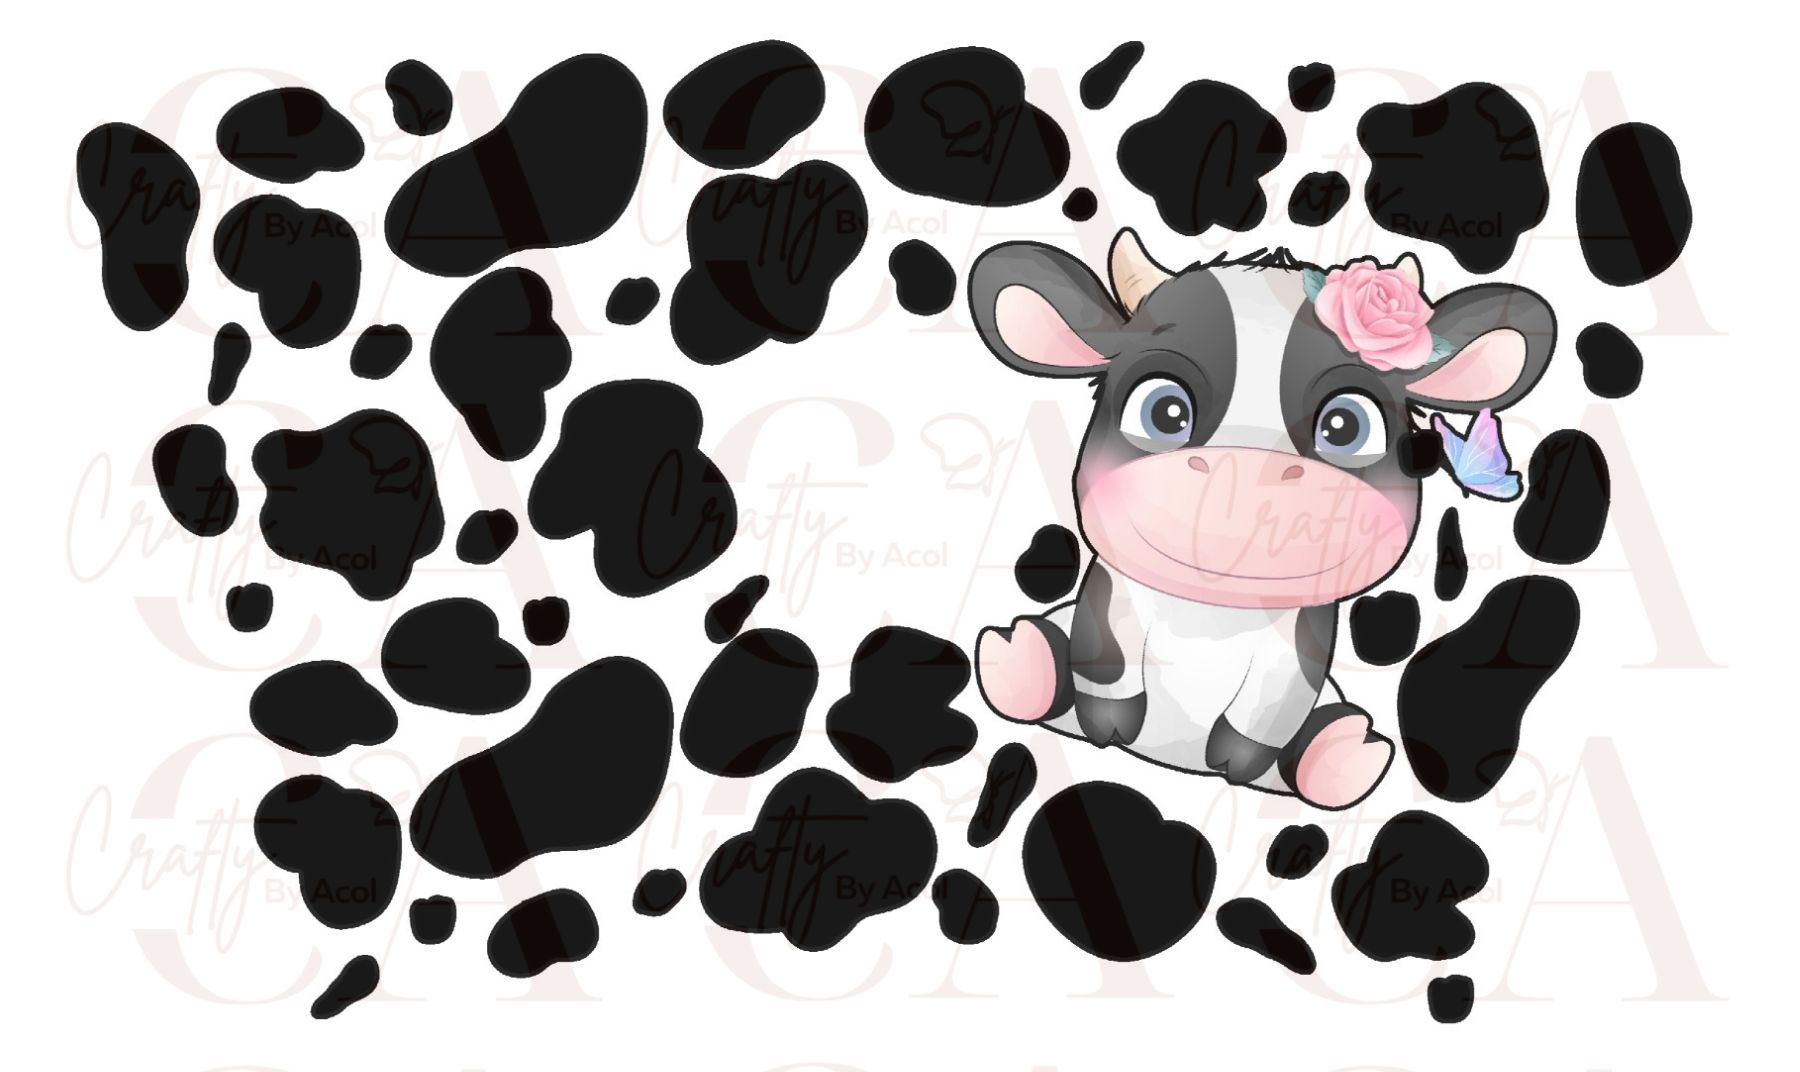 Cow Print Permanent Vinyl Wrap Quencher Cow Wrap Wrap Cow Print Tumbler Cup  NOT Included 